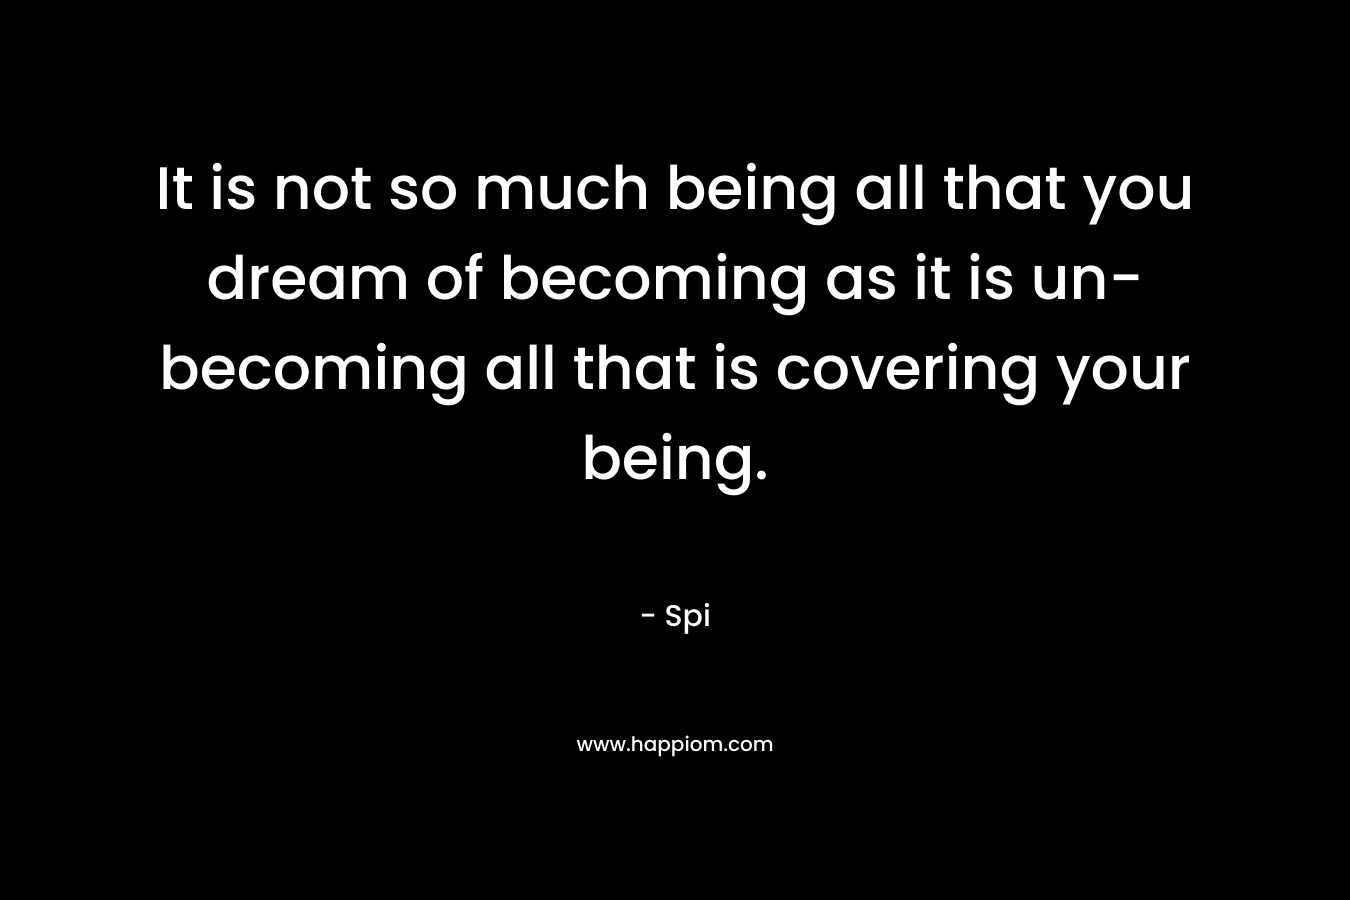 It is not so much being all that you dream of becoming as it is un-becoming all that is covering your being. – Spi